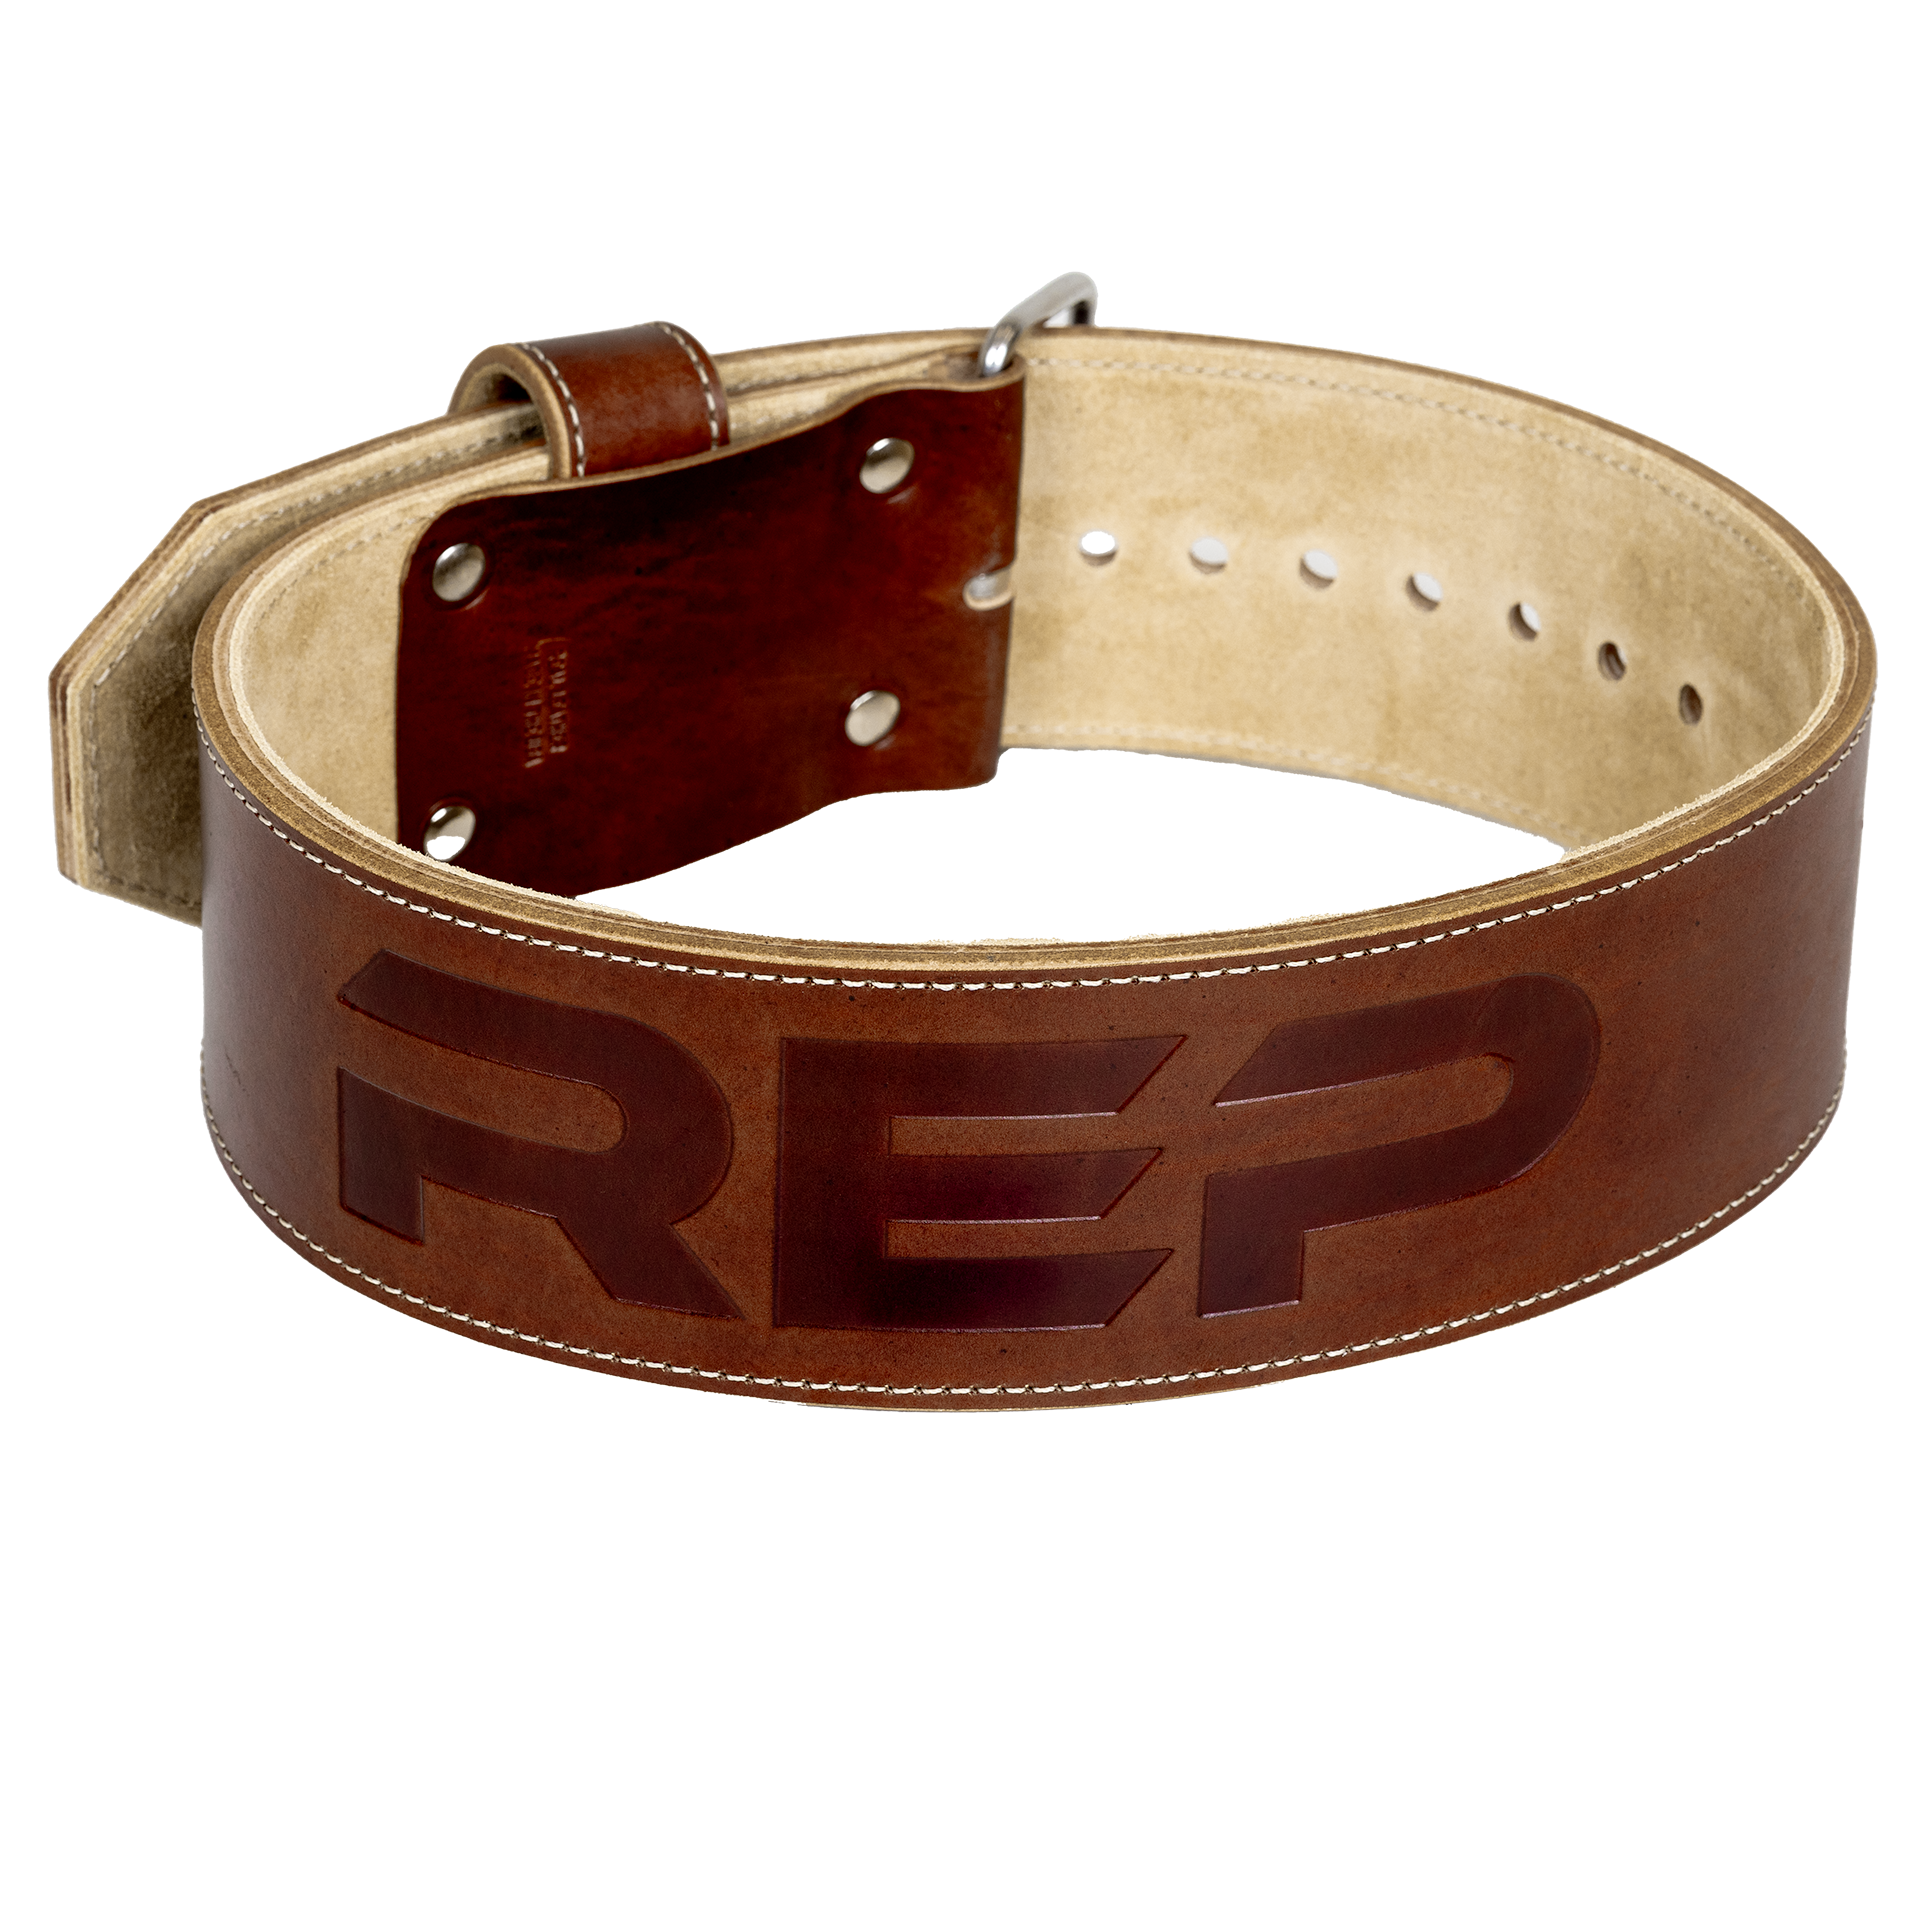 REP USA Premium Leather Lifting Belt - Brown / Small